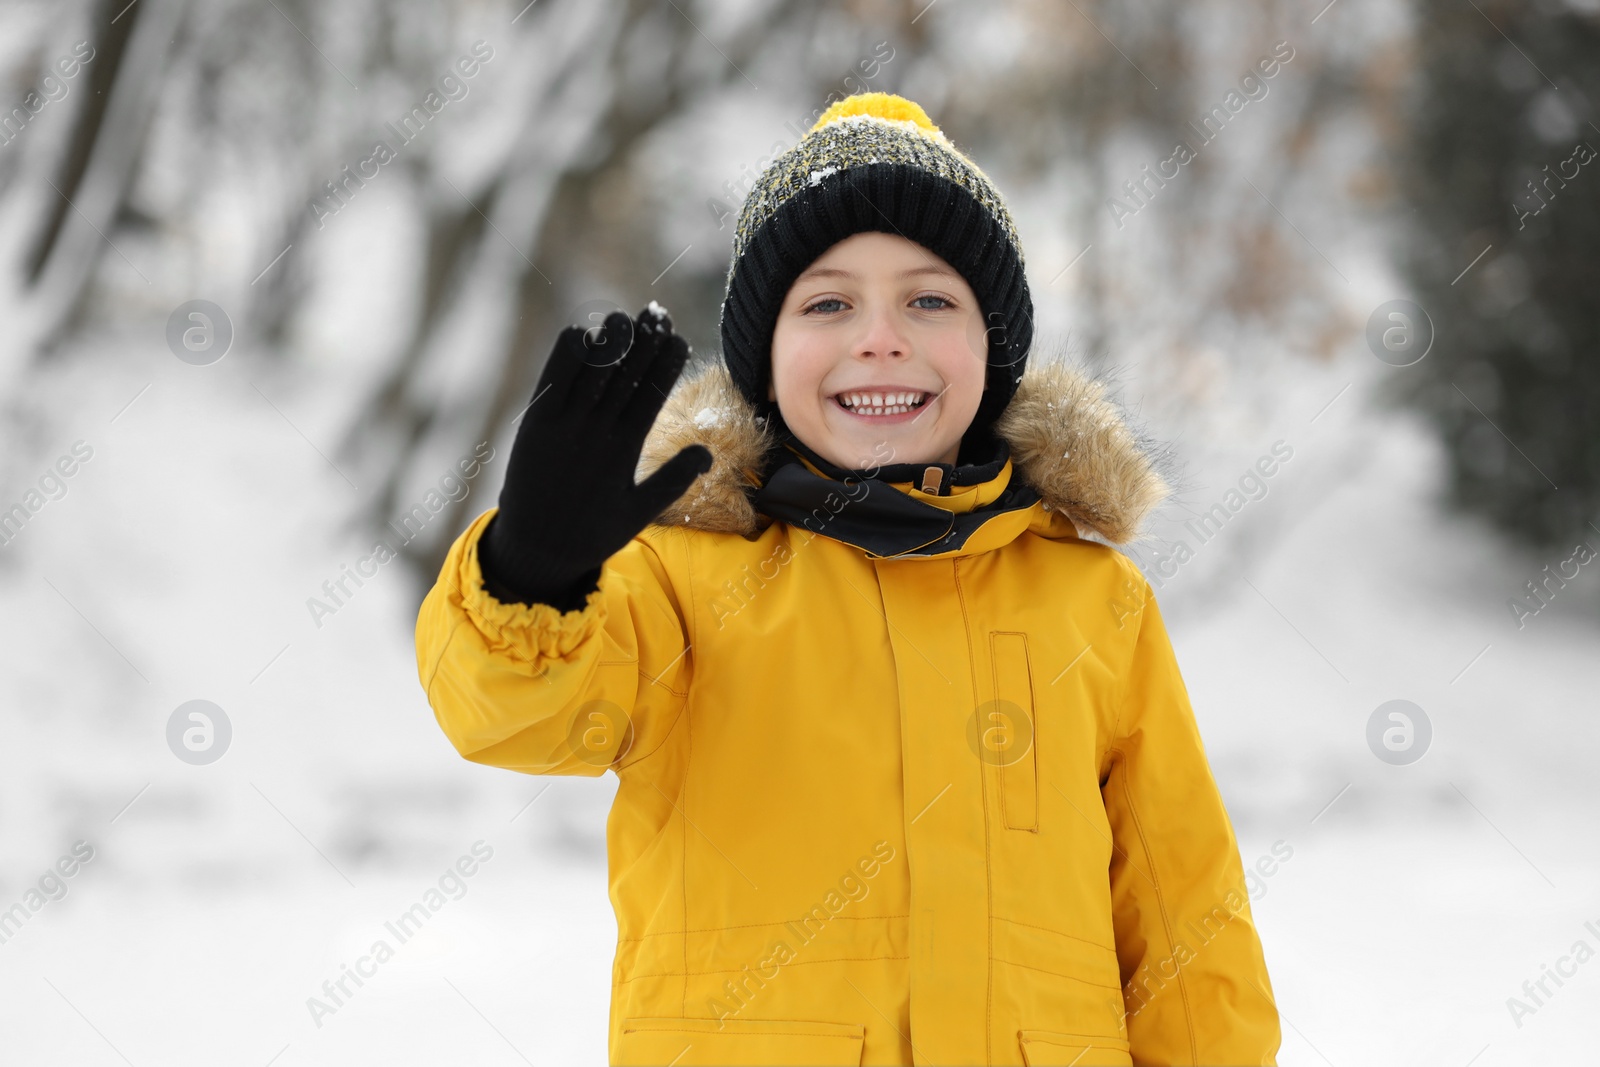 Photo of Cute little boy greeting someone in snowy park on winter day